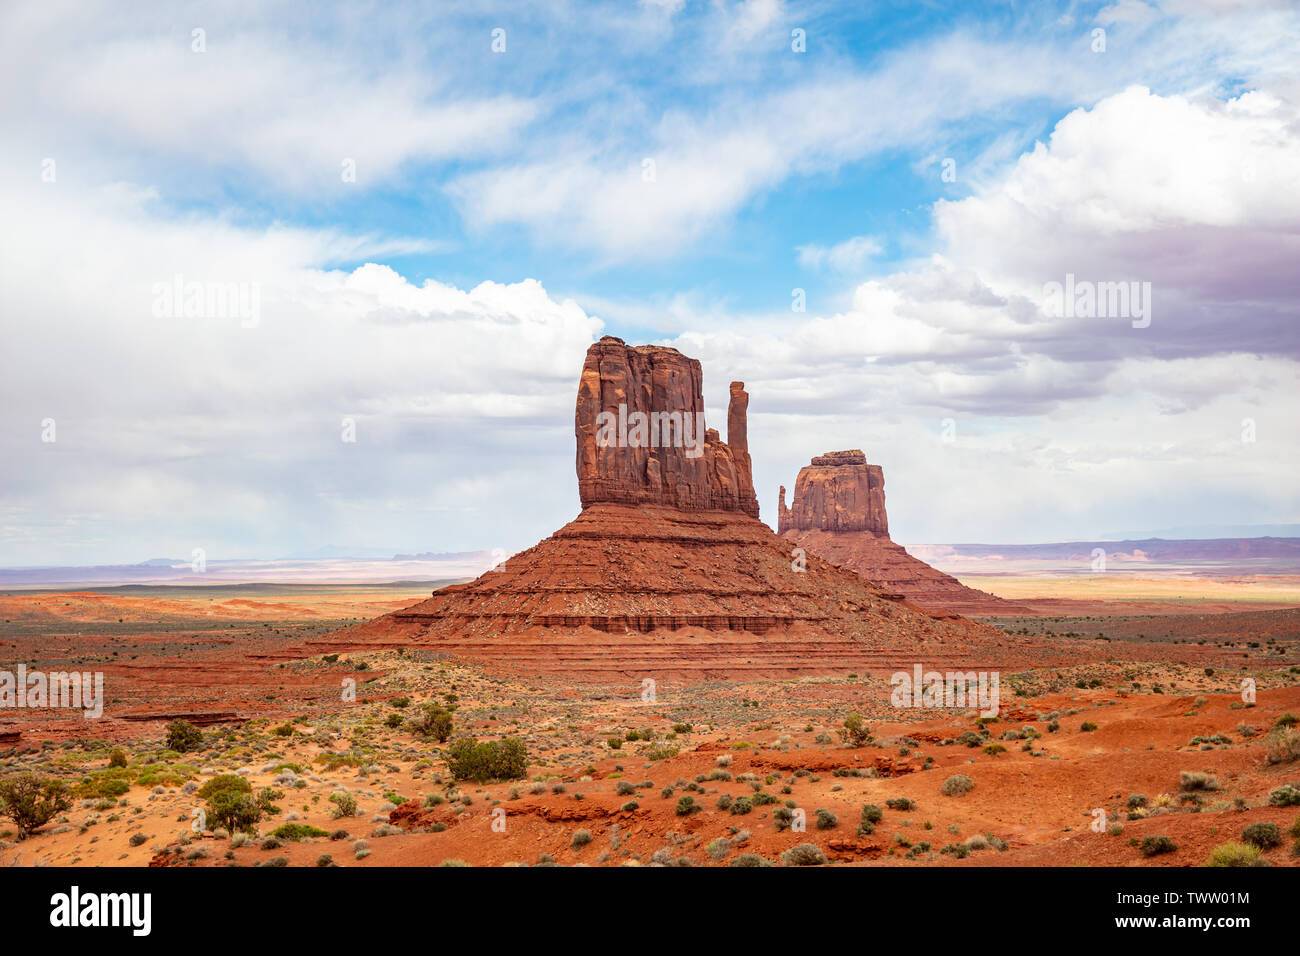 Monument Valley, Navajo Tribal Park in the Arizona-Utah border, United States of America. Red rocks against cloudy sky background Stock Photo